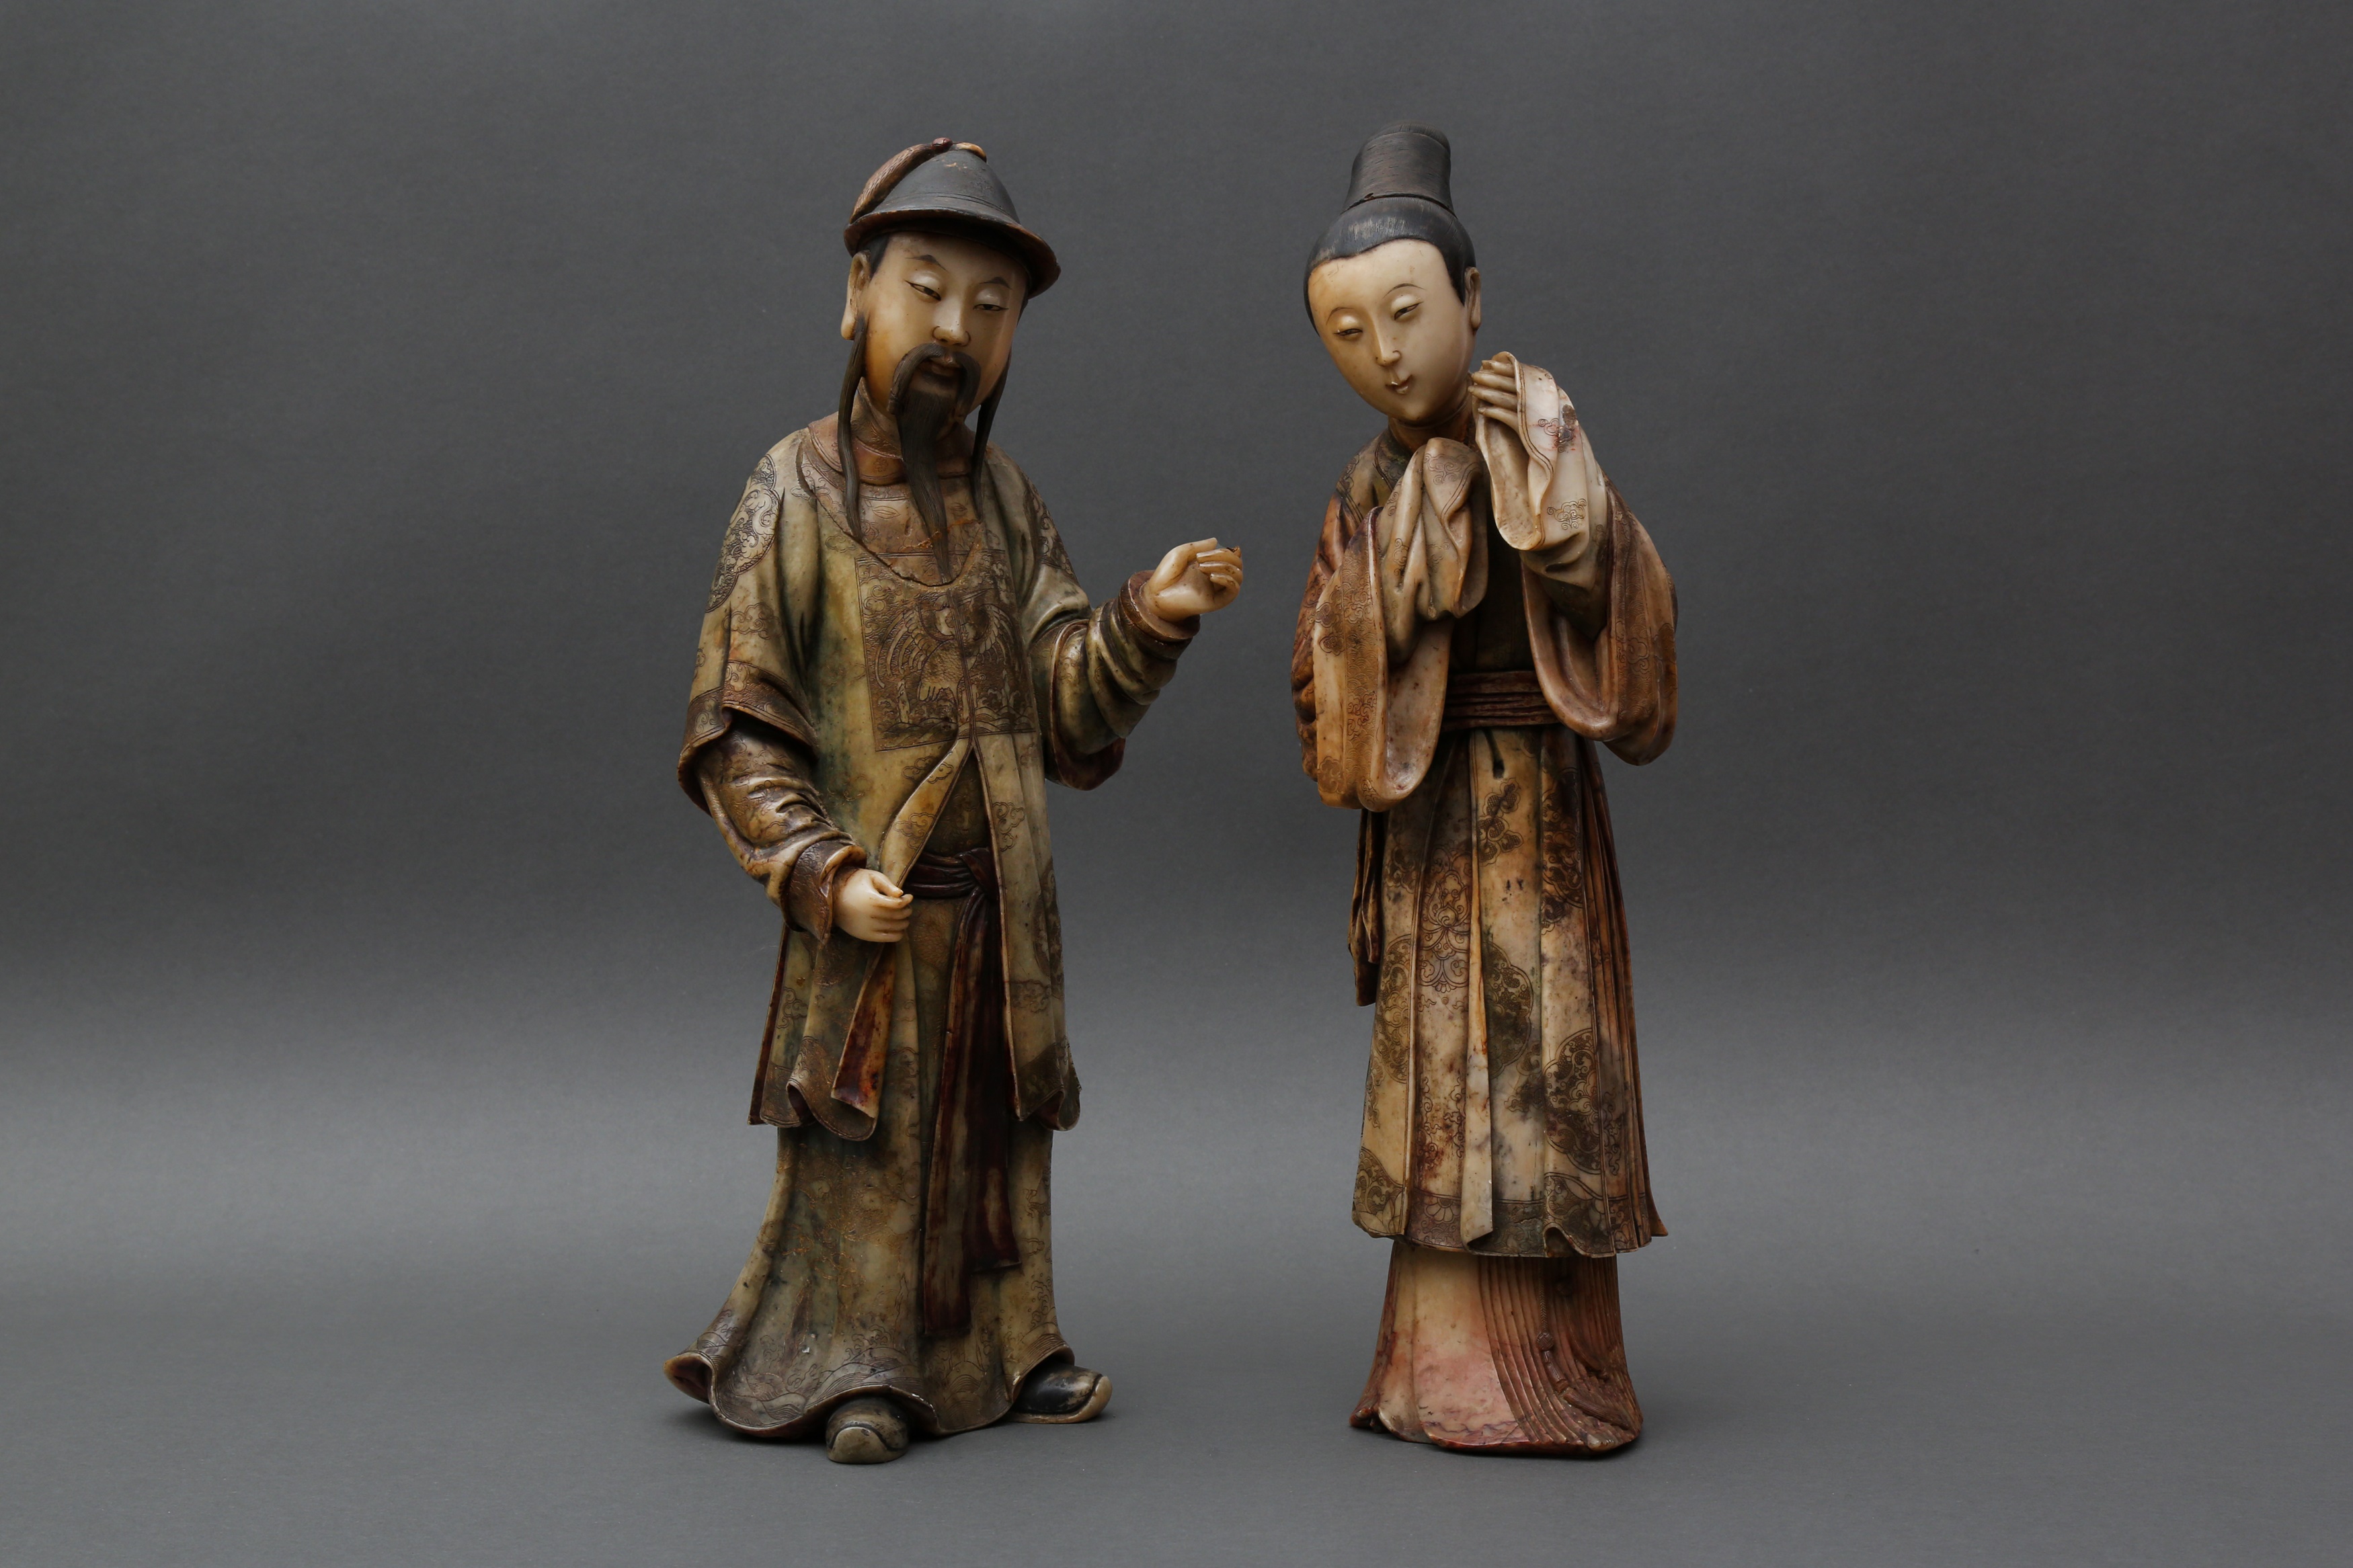 TWO RARE AND IMPRESSIVE CHINESE SOAPSTONE STANDING COURT FIGURES 清十八世紀 壽山石清廷人物像兩件